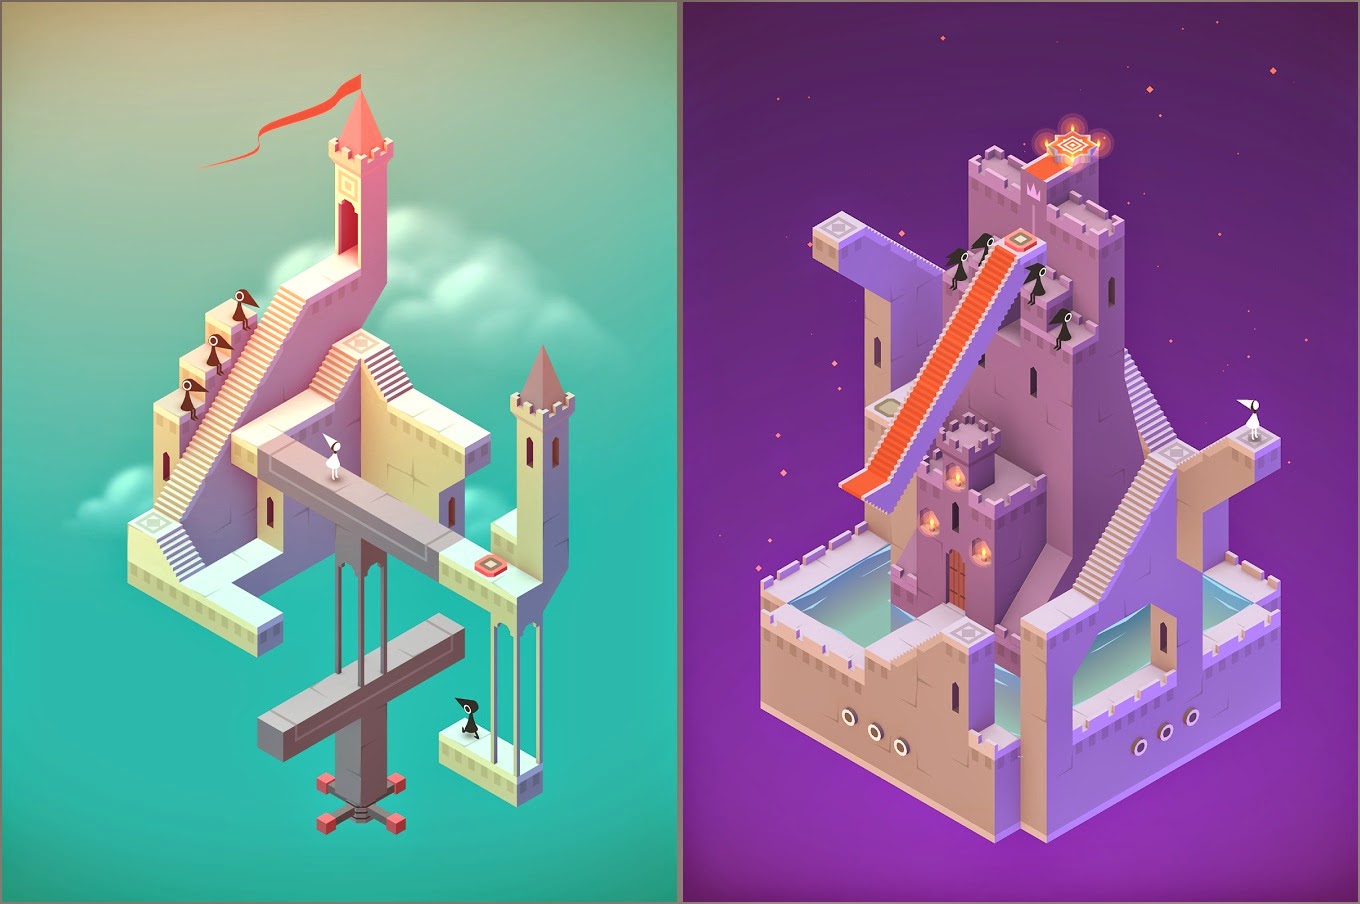 [Juego] Monument Valley Apk v1.0.5.3 + Data Mod Levels Monument+Valley1-horz